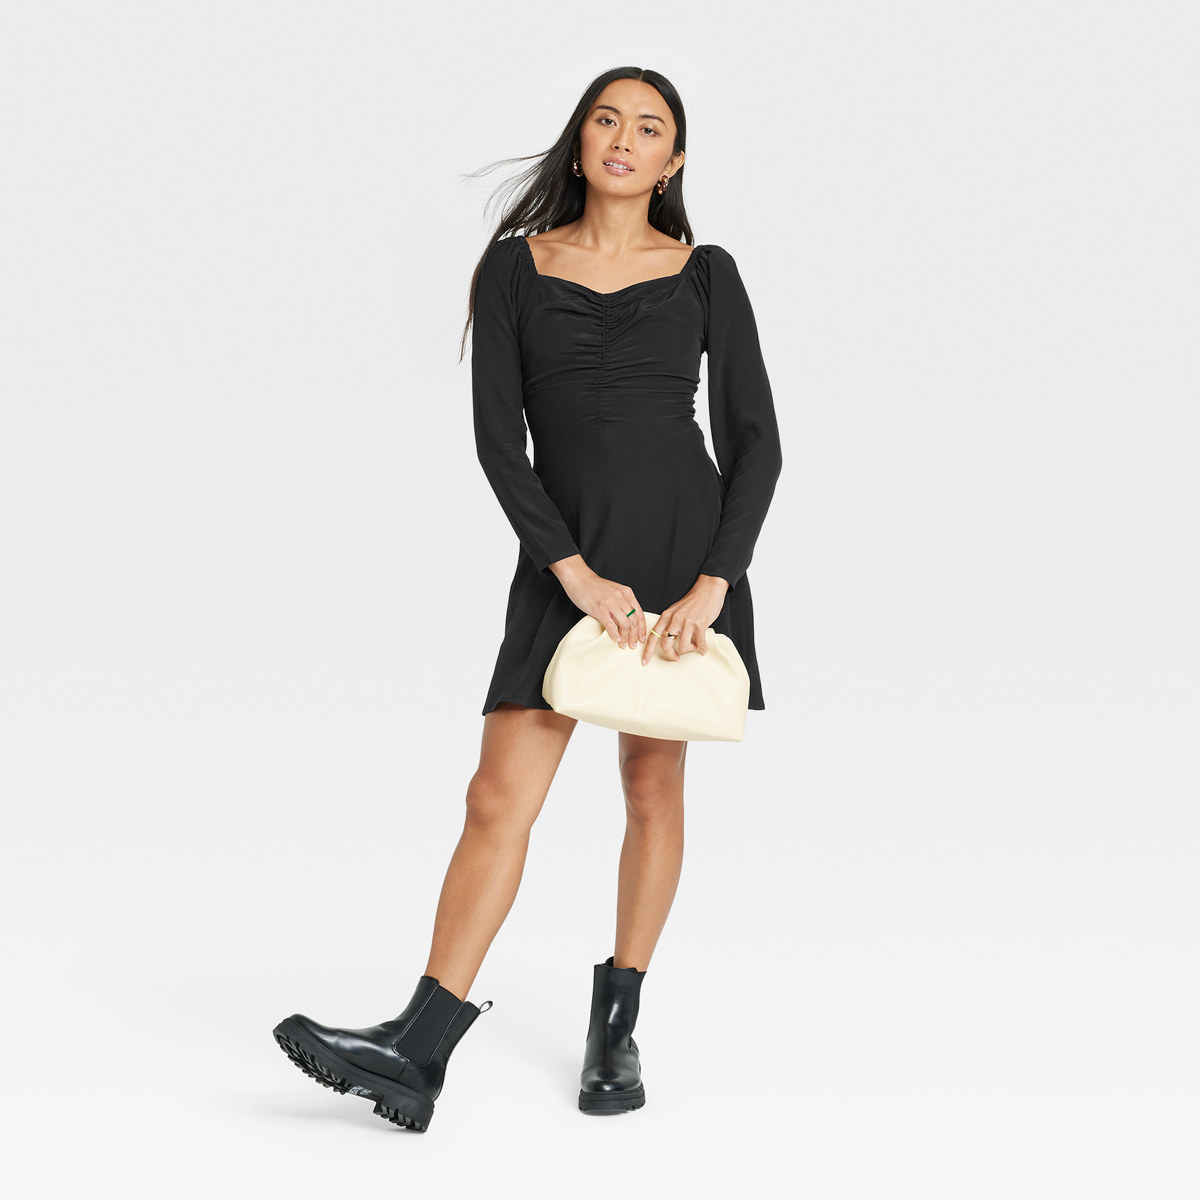 Woman sports flirty look of short black dress, chunky boots and white clutch